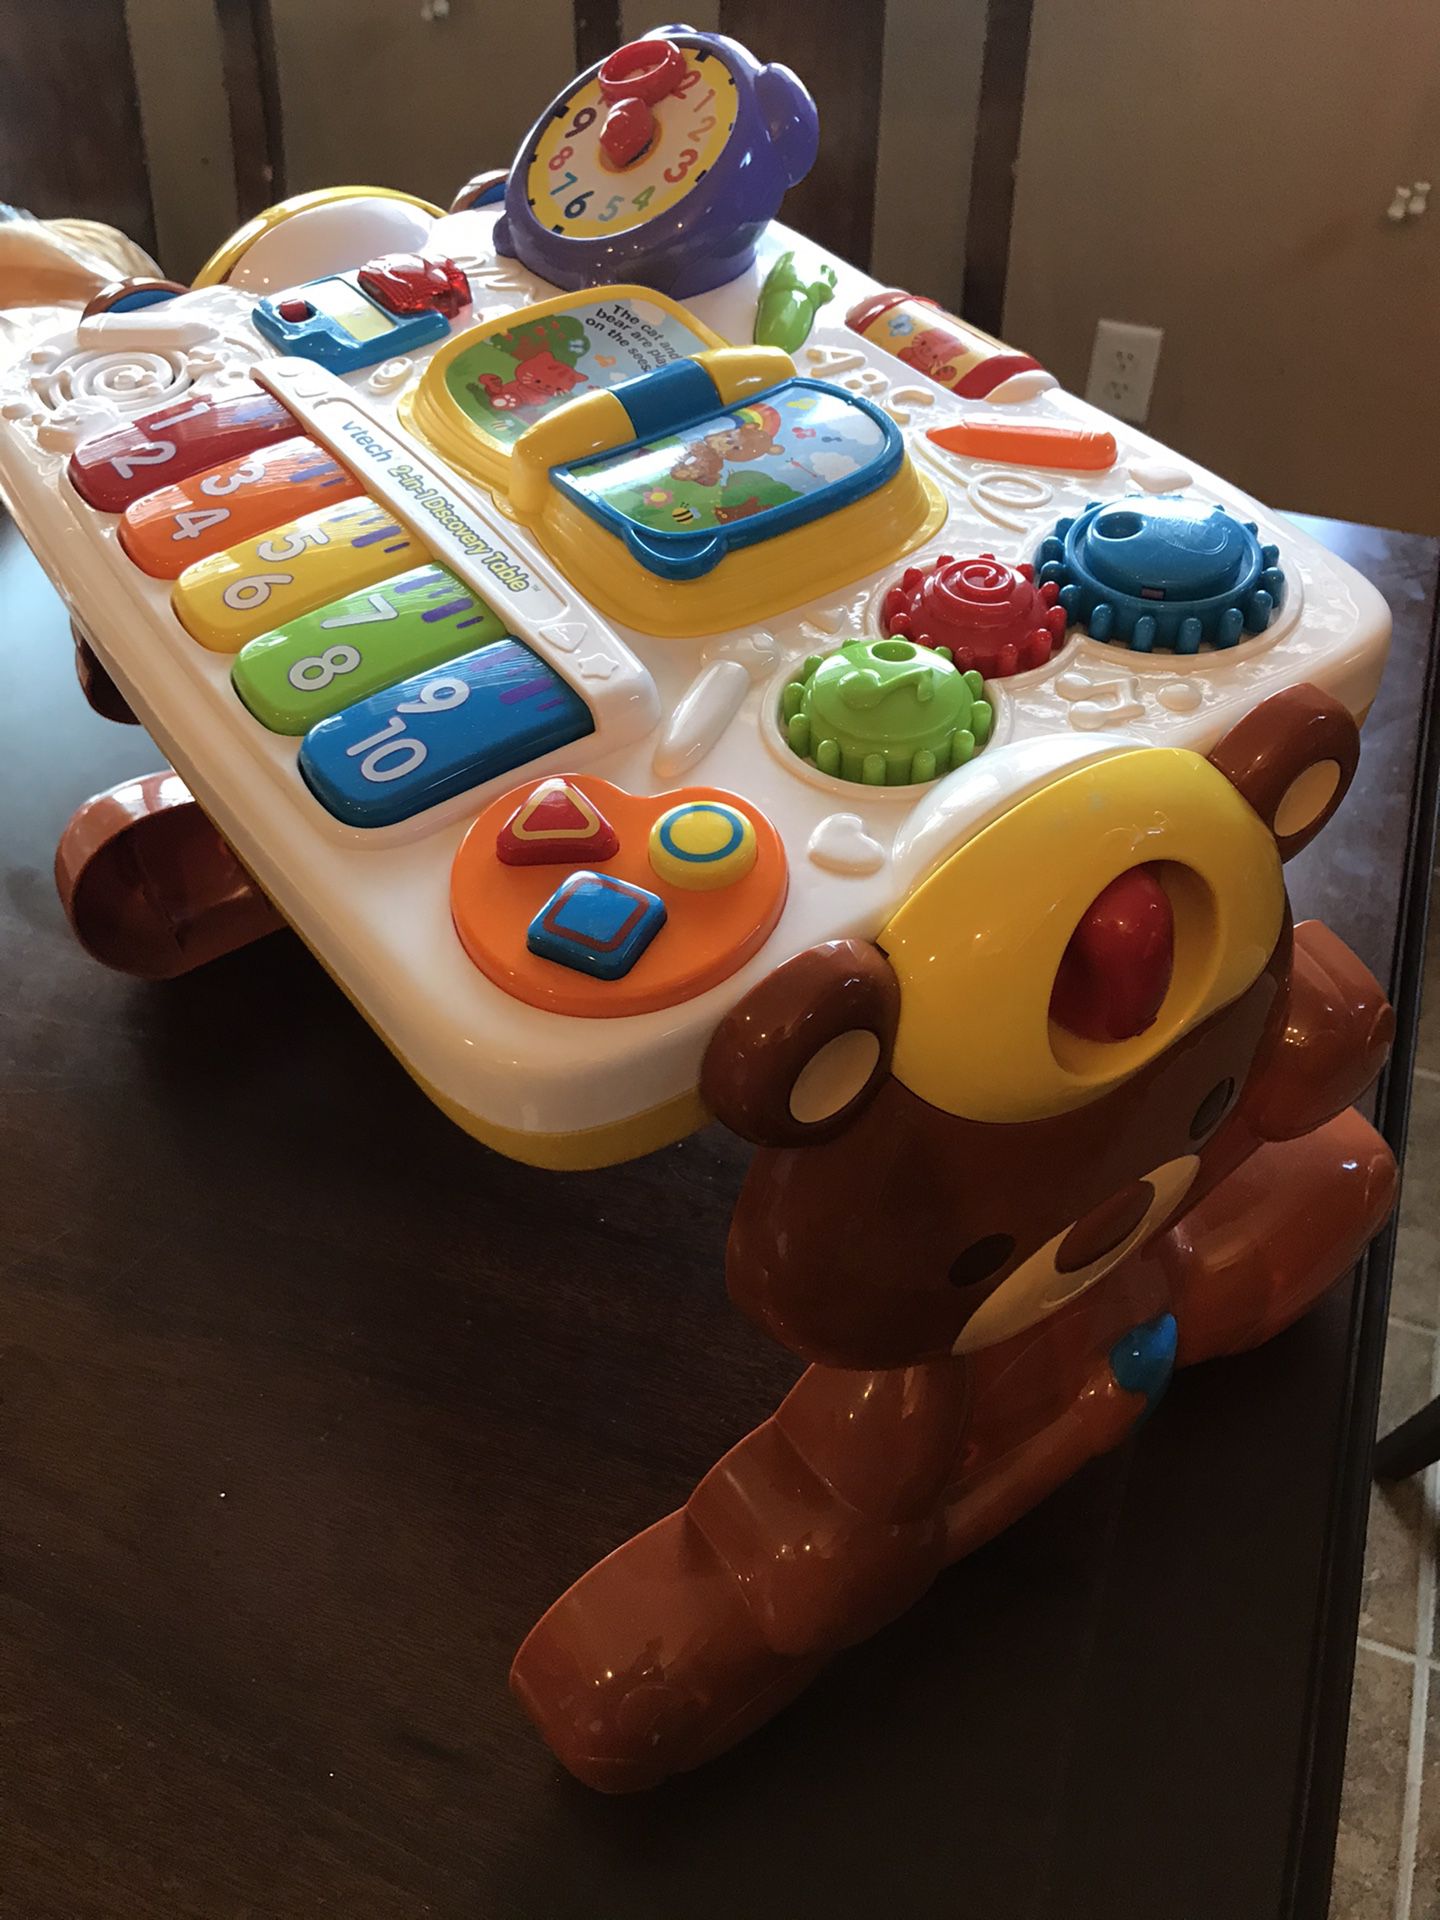 Vtech 2-in-1 activity discovery table music works great!